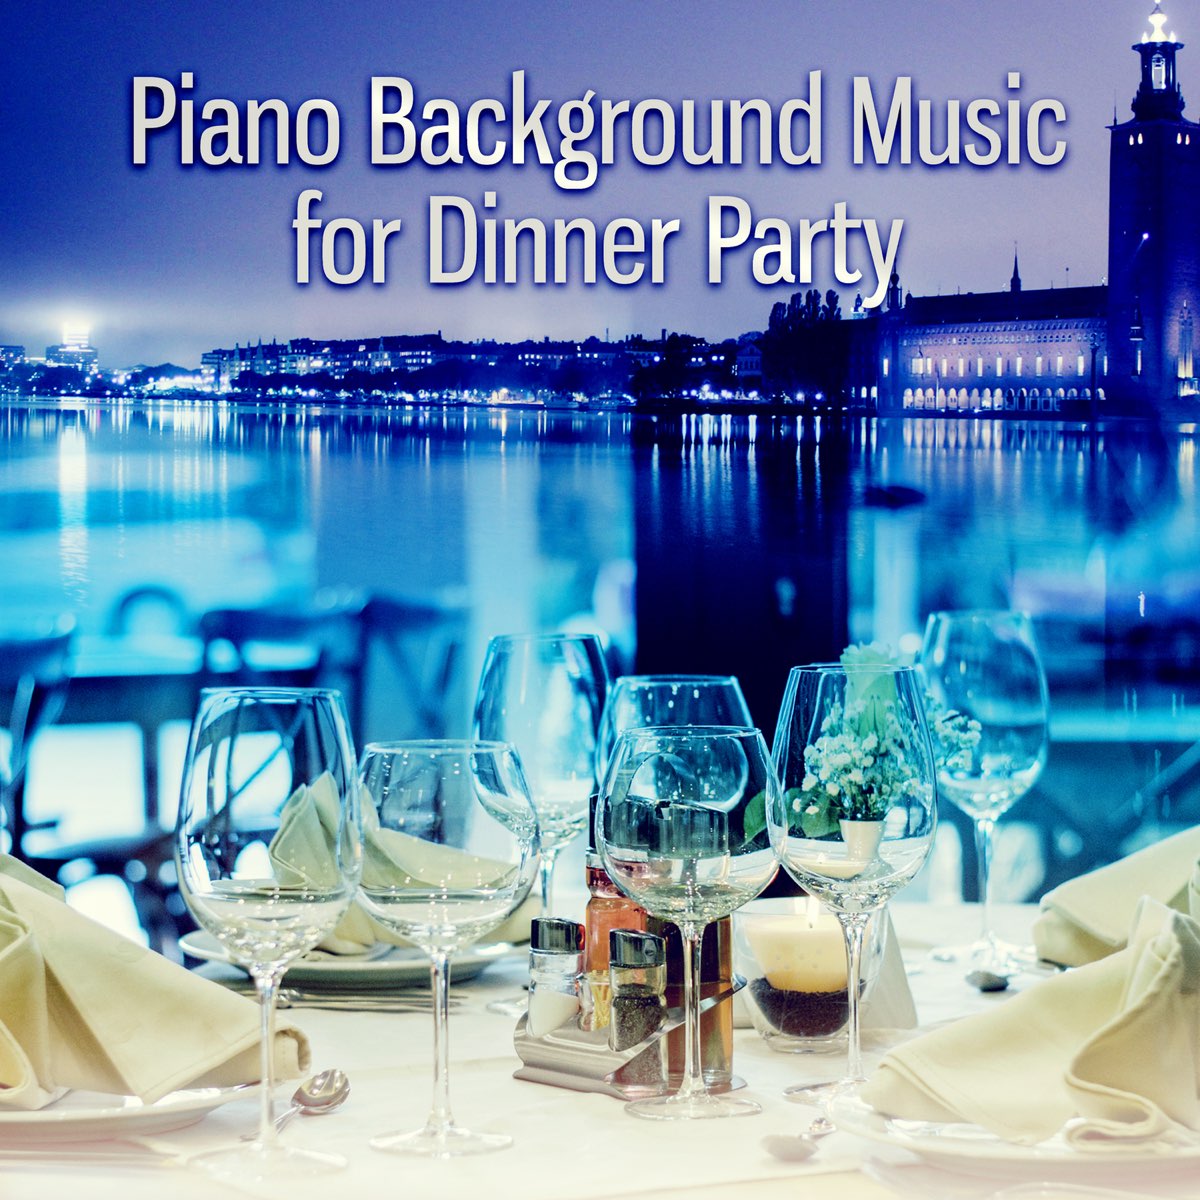 Piano Background Music for Dinner Party: Jazz Music for Lunch Time, Family  Dinner, Cocktail Party, Birthday Party, Family Time, Piano Bar, Garden Party,  Smooth Jazz for Relaxation & Chill Out by Piano